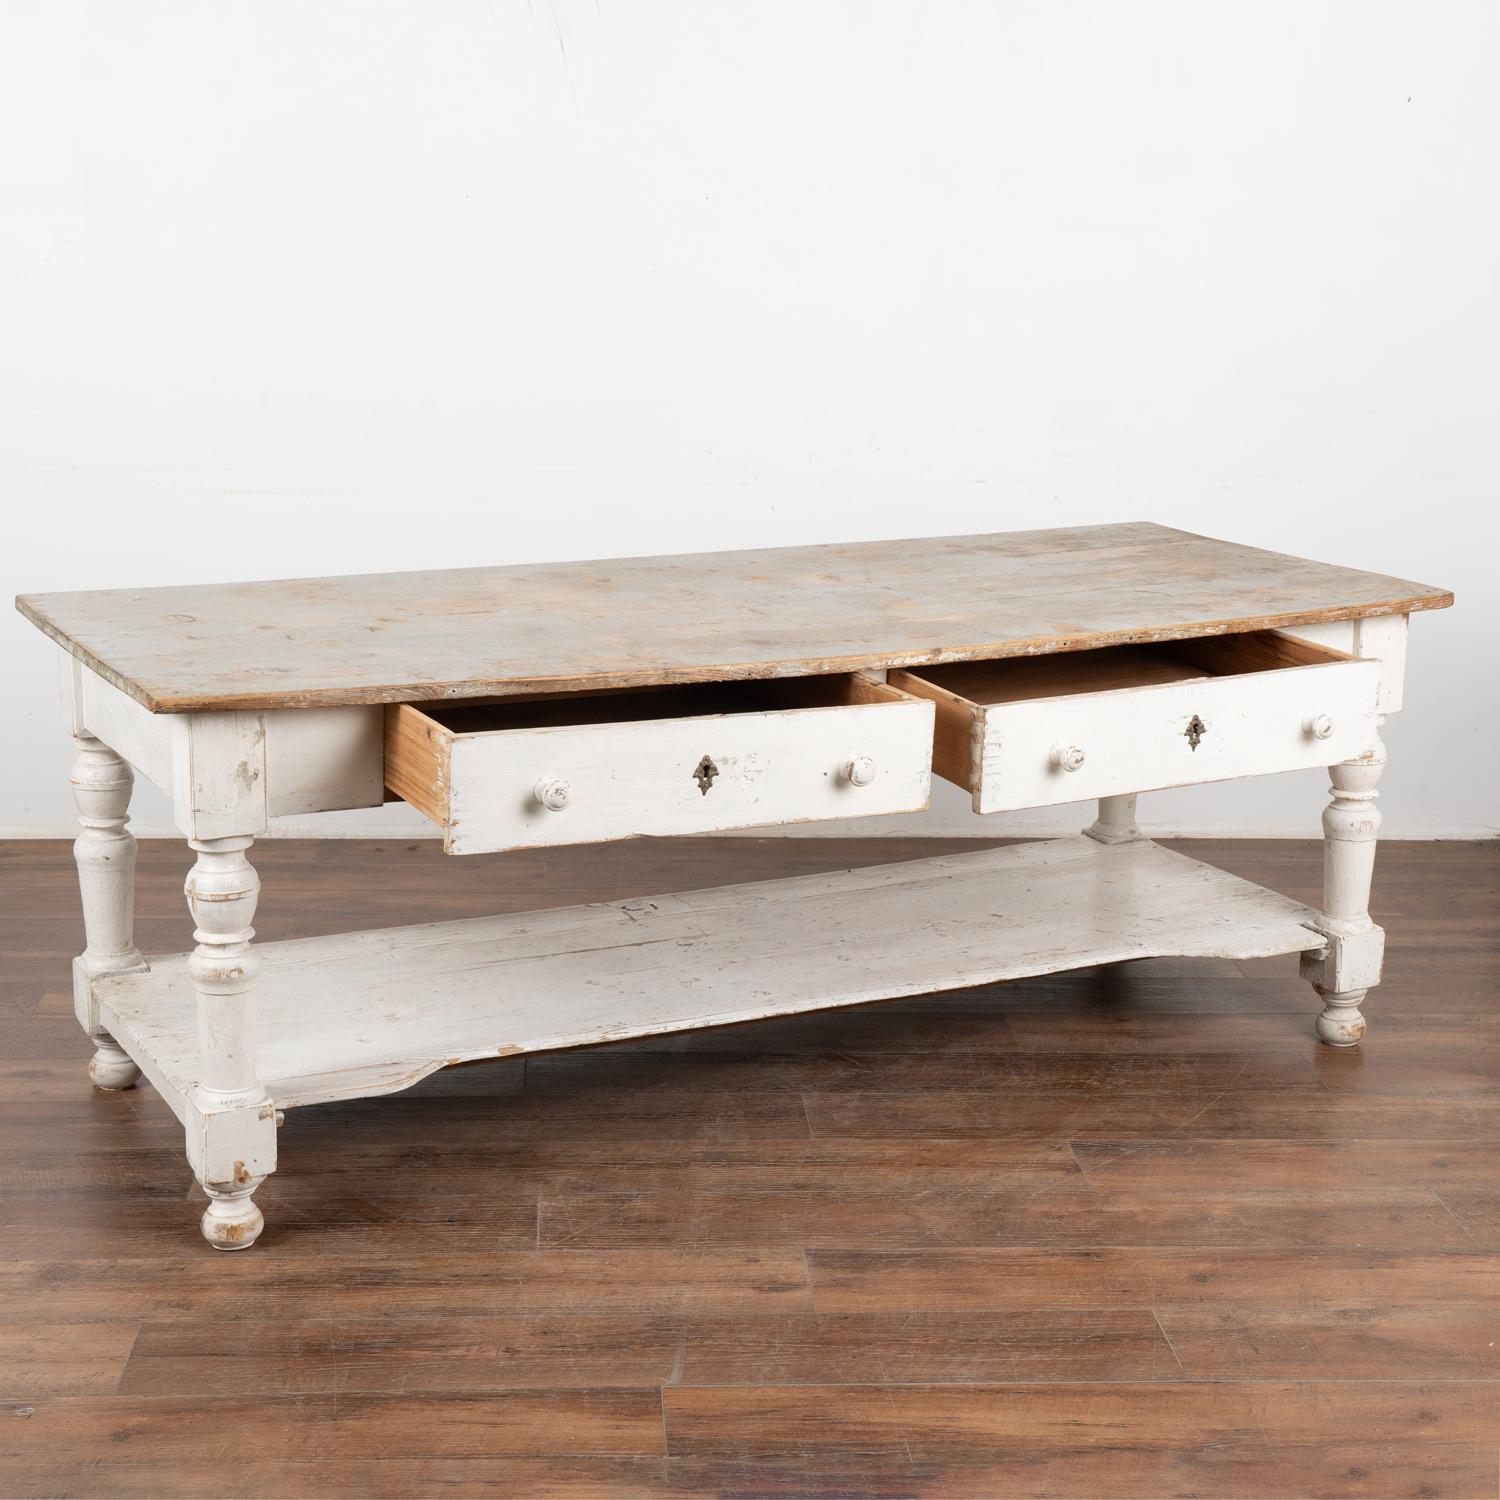 Country Large Farmhouse Console Kitchen Island With Shelf & Drawers Sweden circa 1860-80